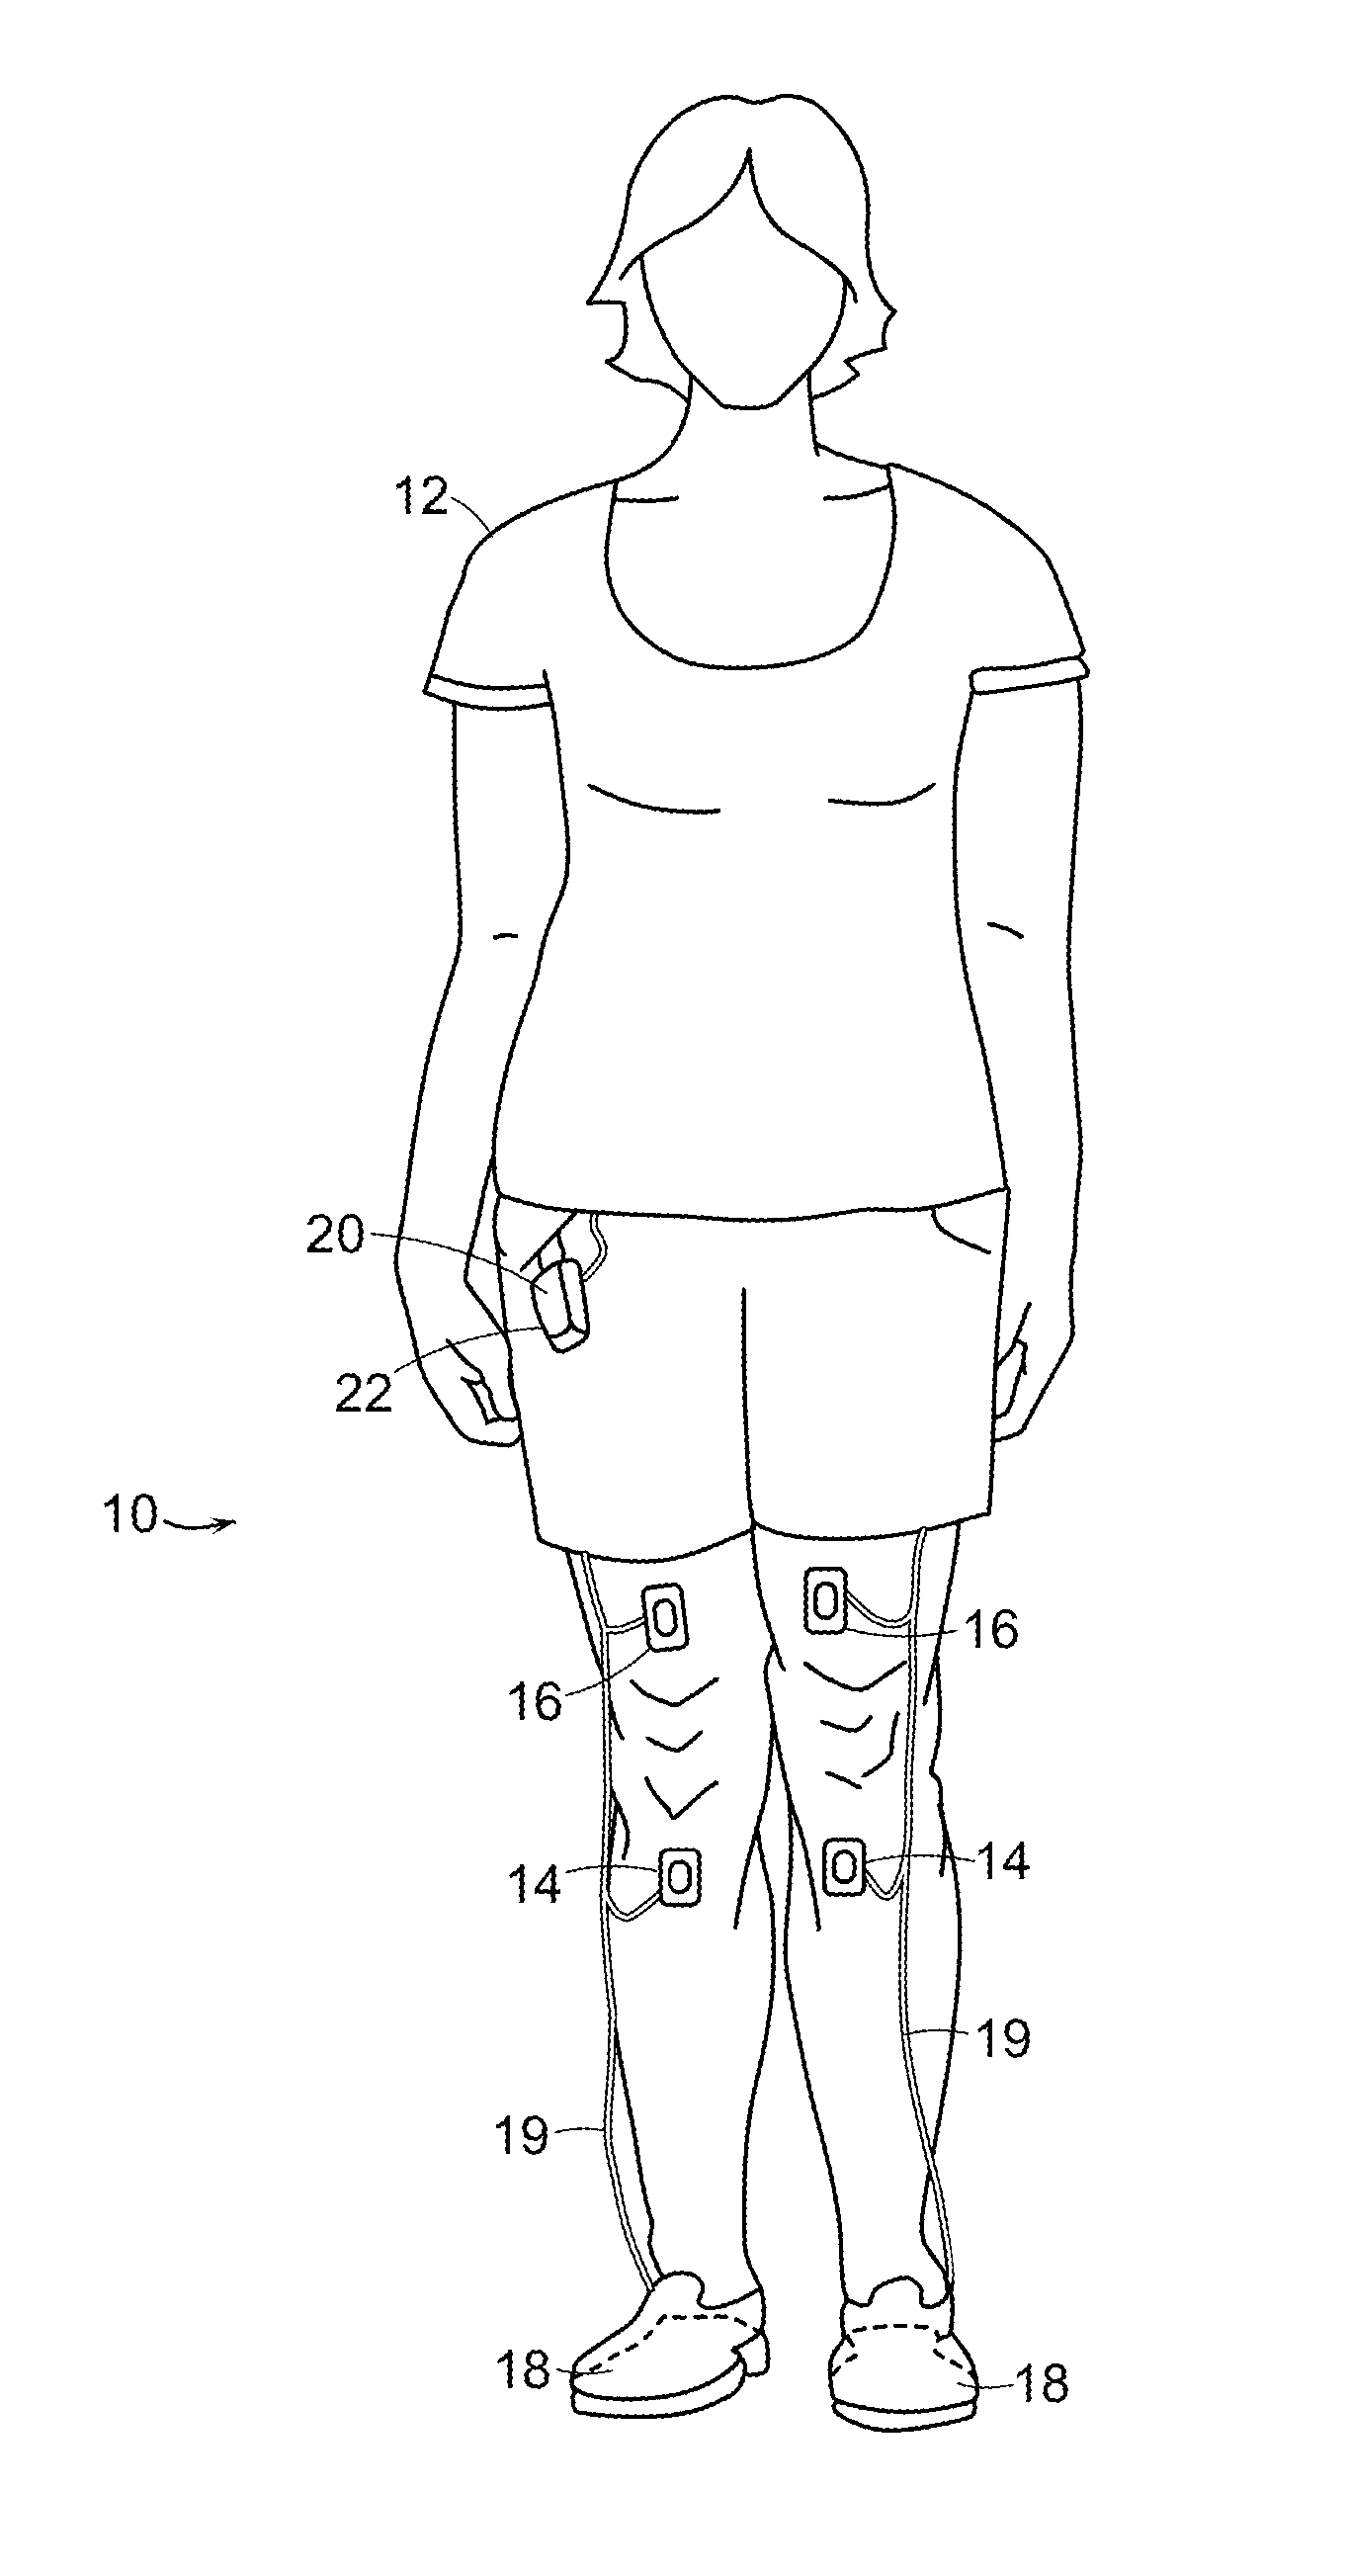 Feedback Method And Wearable Device To Monitor And Modulate Knee Adduction Moment